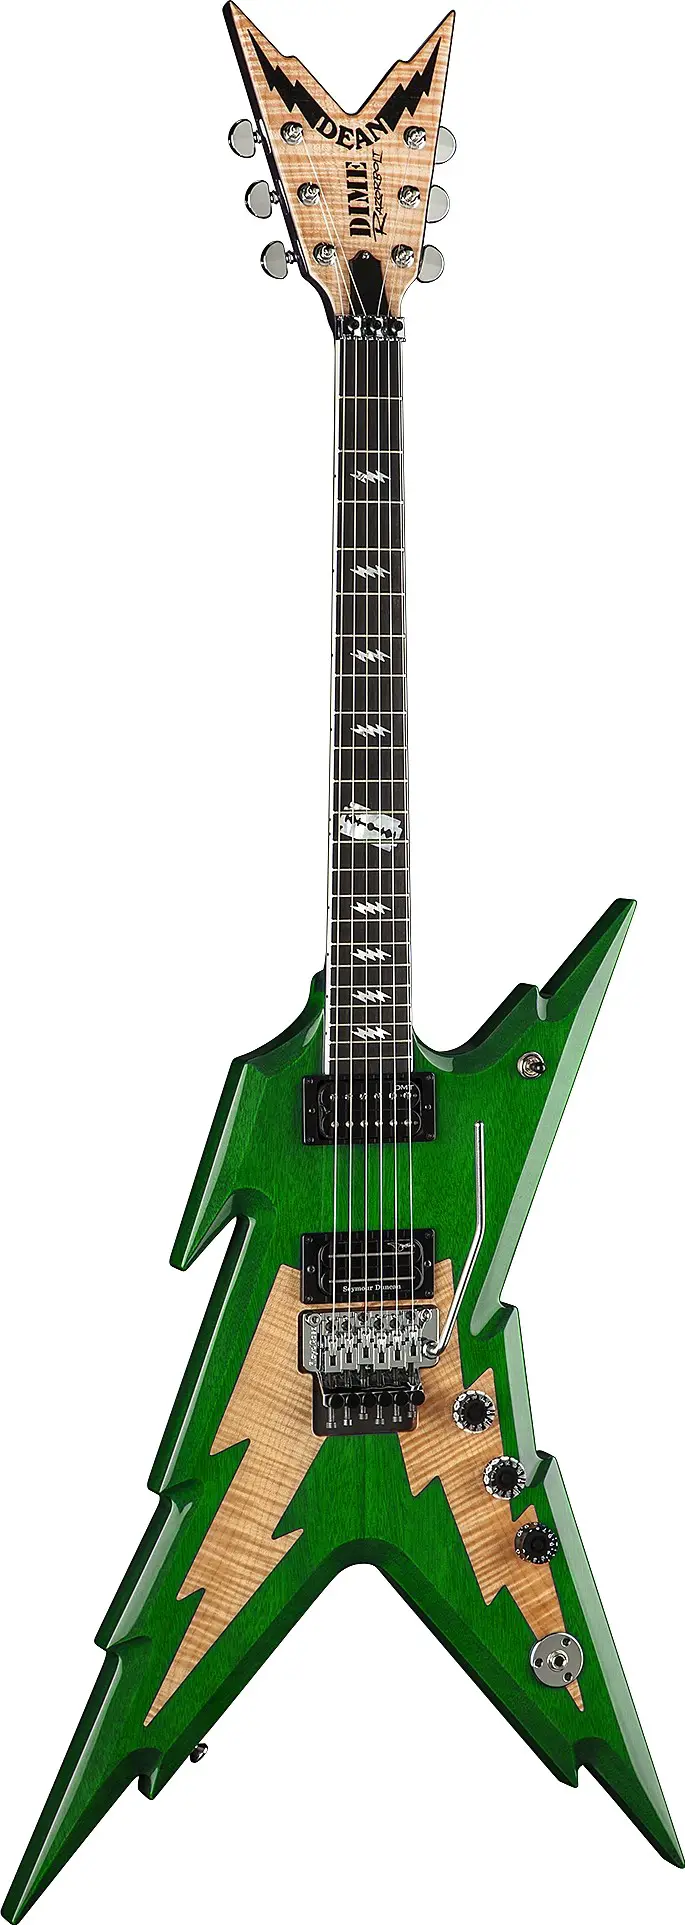 USA Dime Razorbolt Limited Edition by Dean